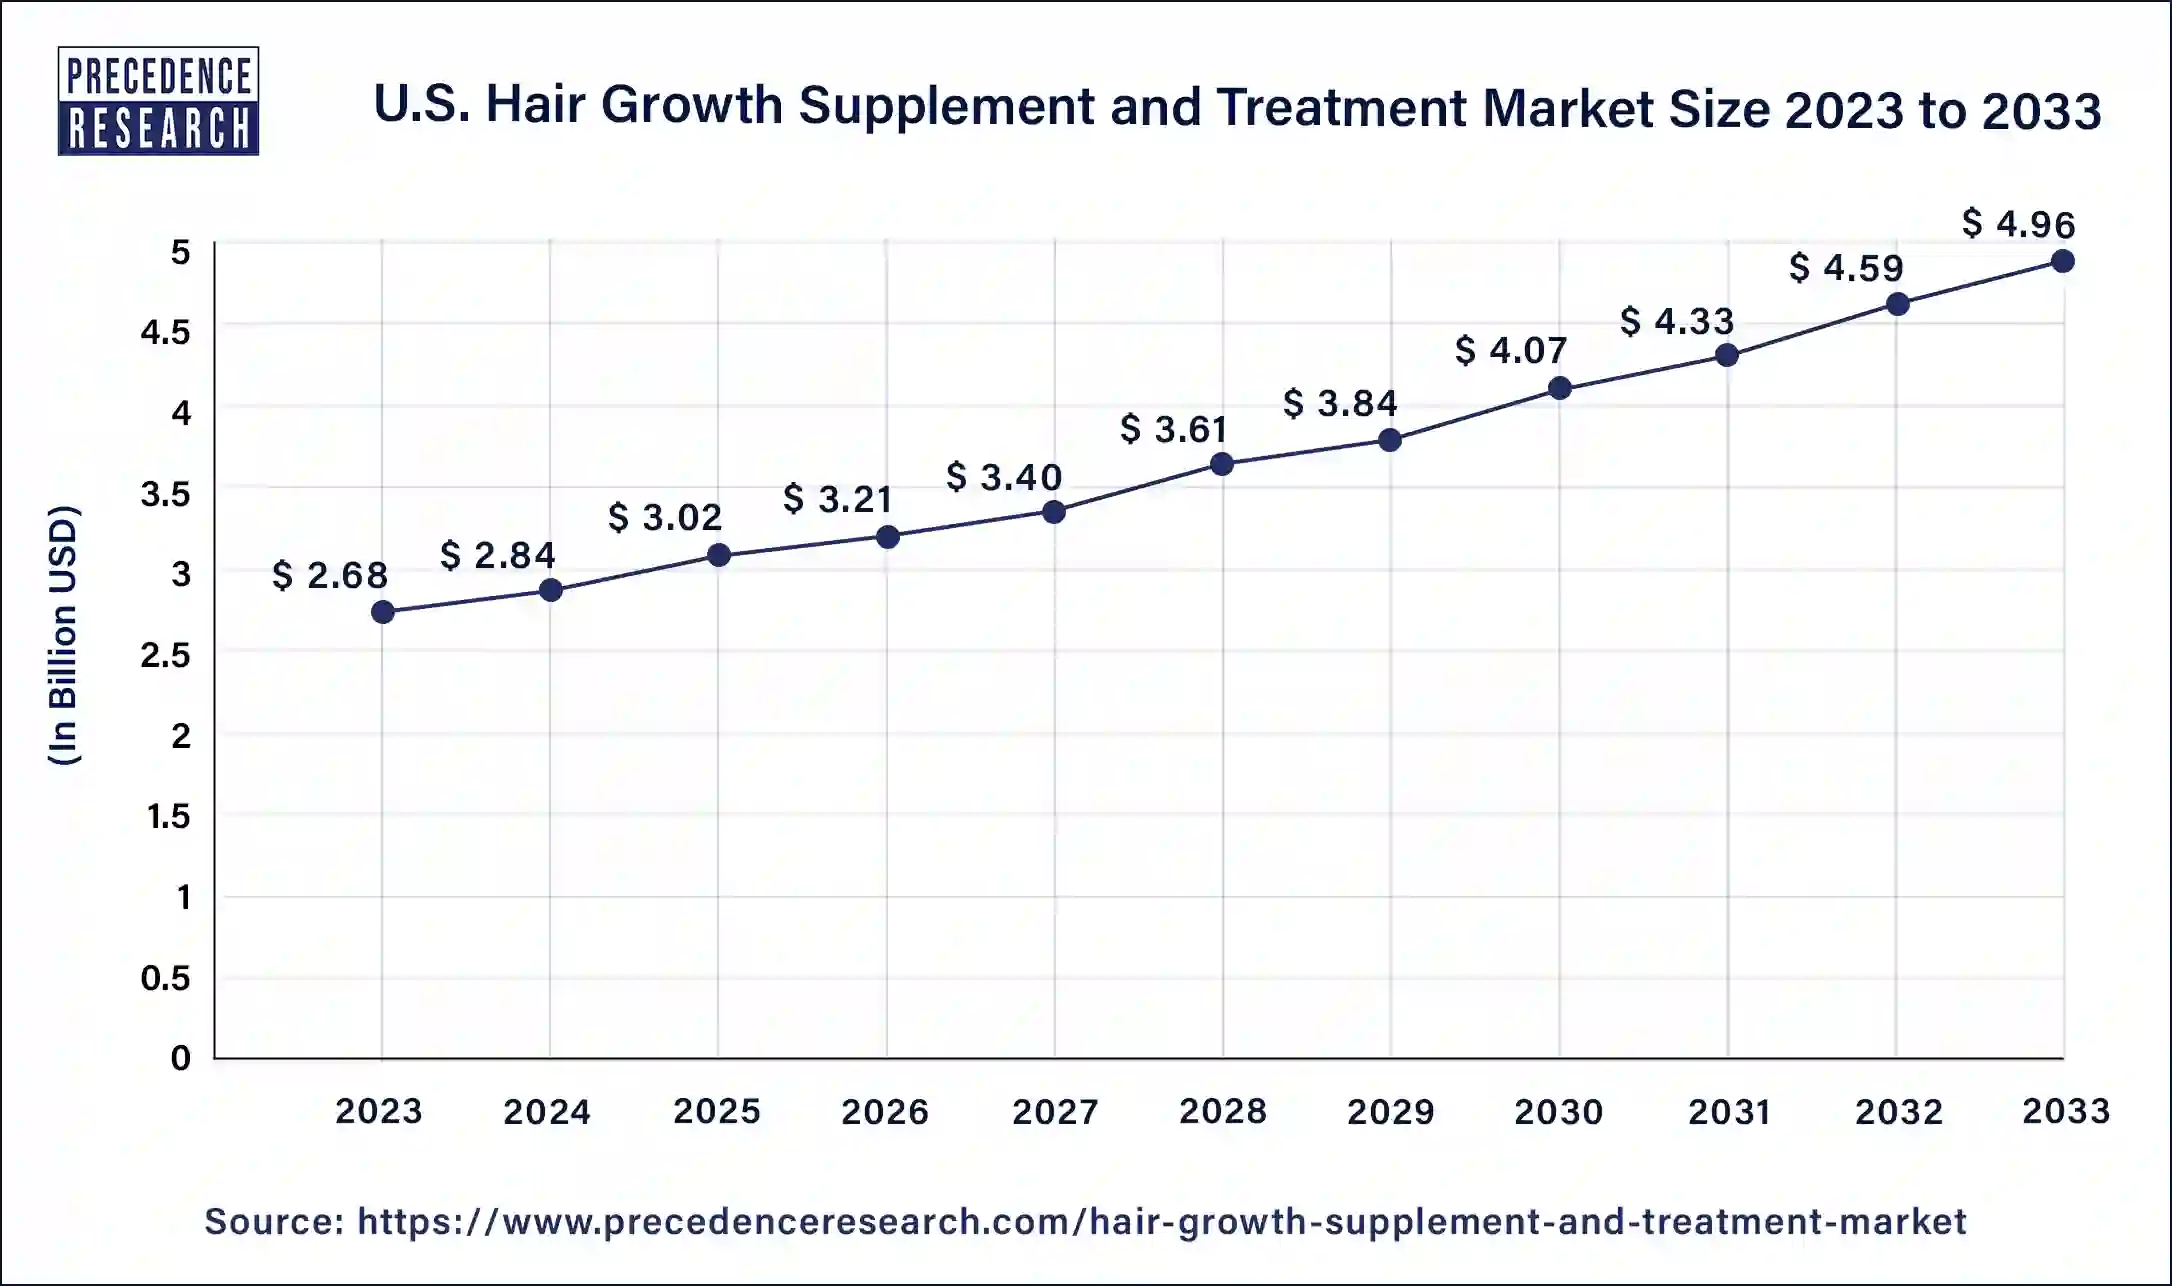 U.S. Hair Growth Supplement and Treatment Market Size 2024 to 2033